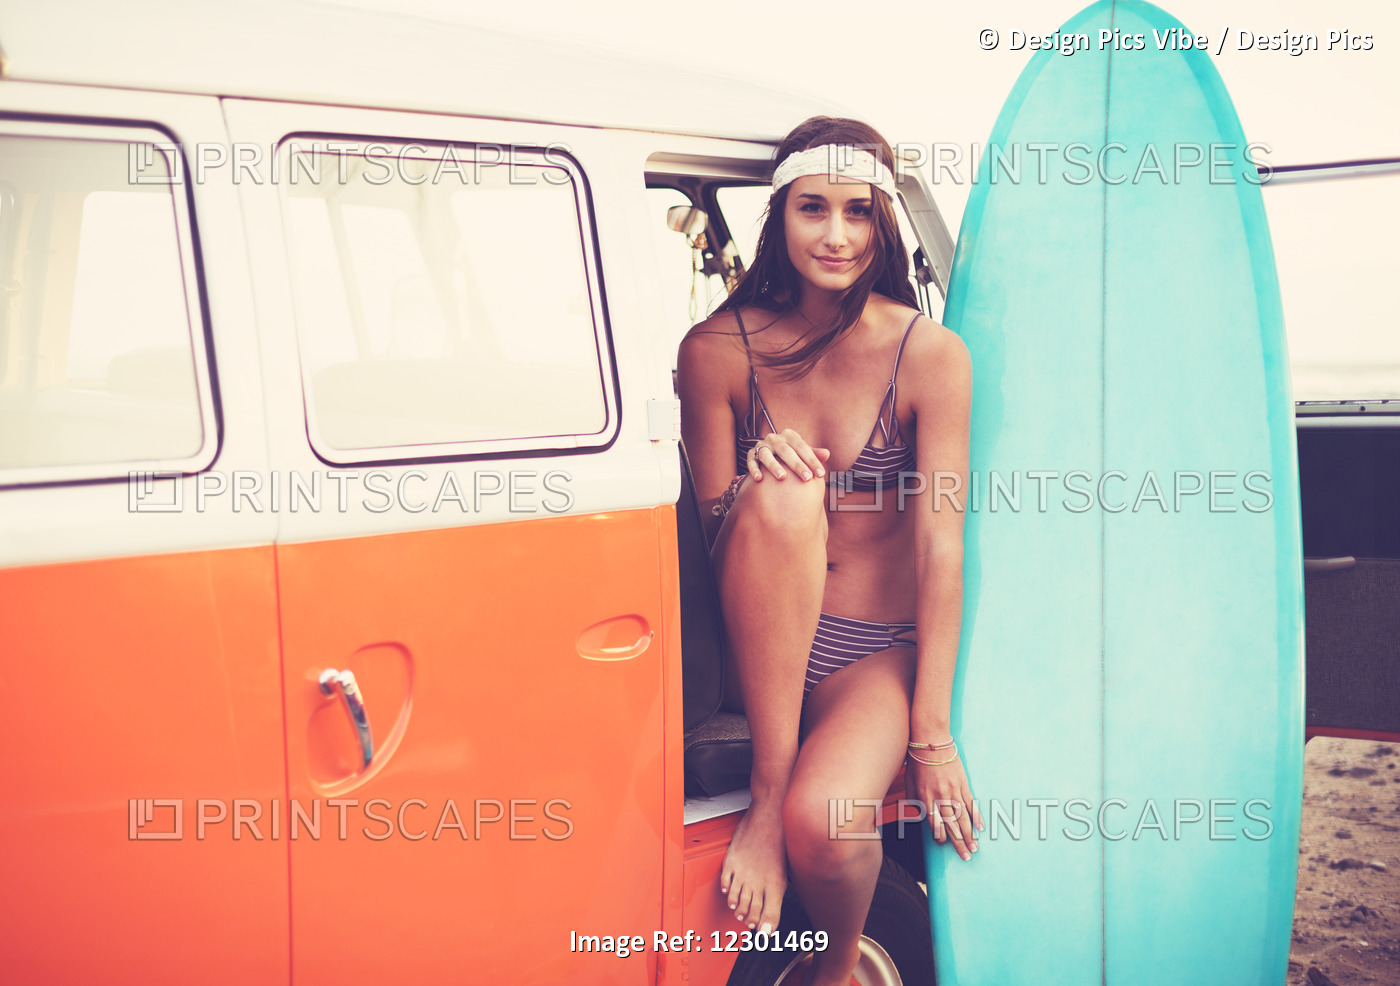 Beach Lifestyle, Beautiful Surfer Girl With Classic Vintage Surf Van On The ...